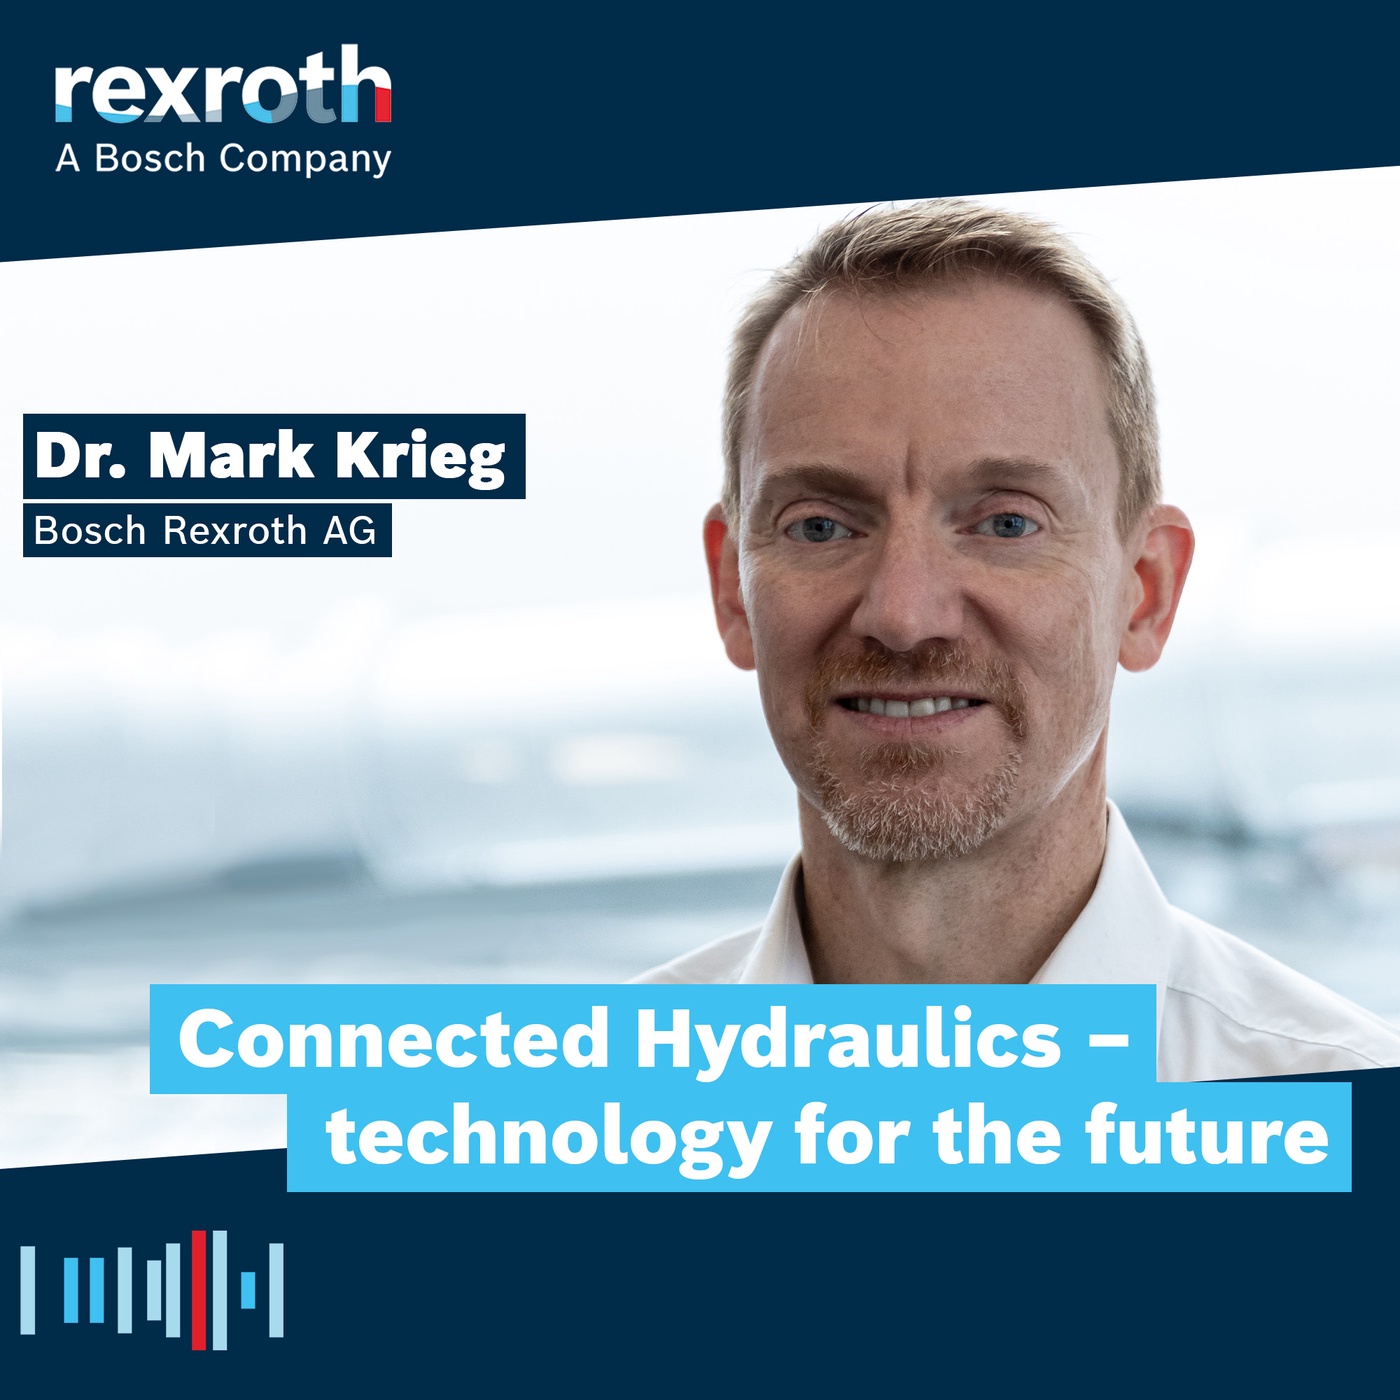 Connected Hydraulics - technology for the future